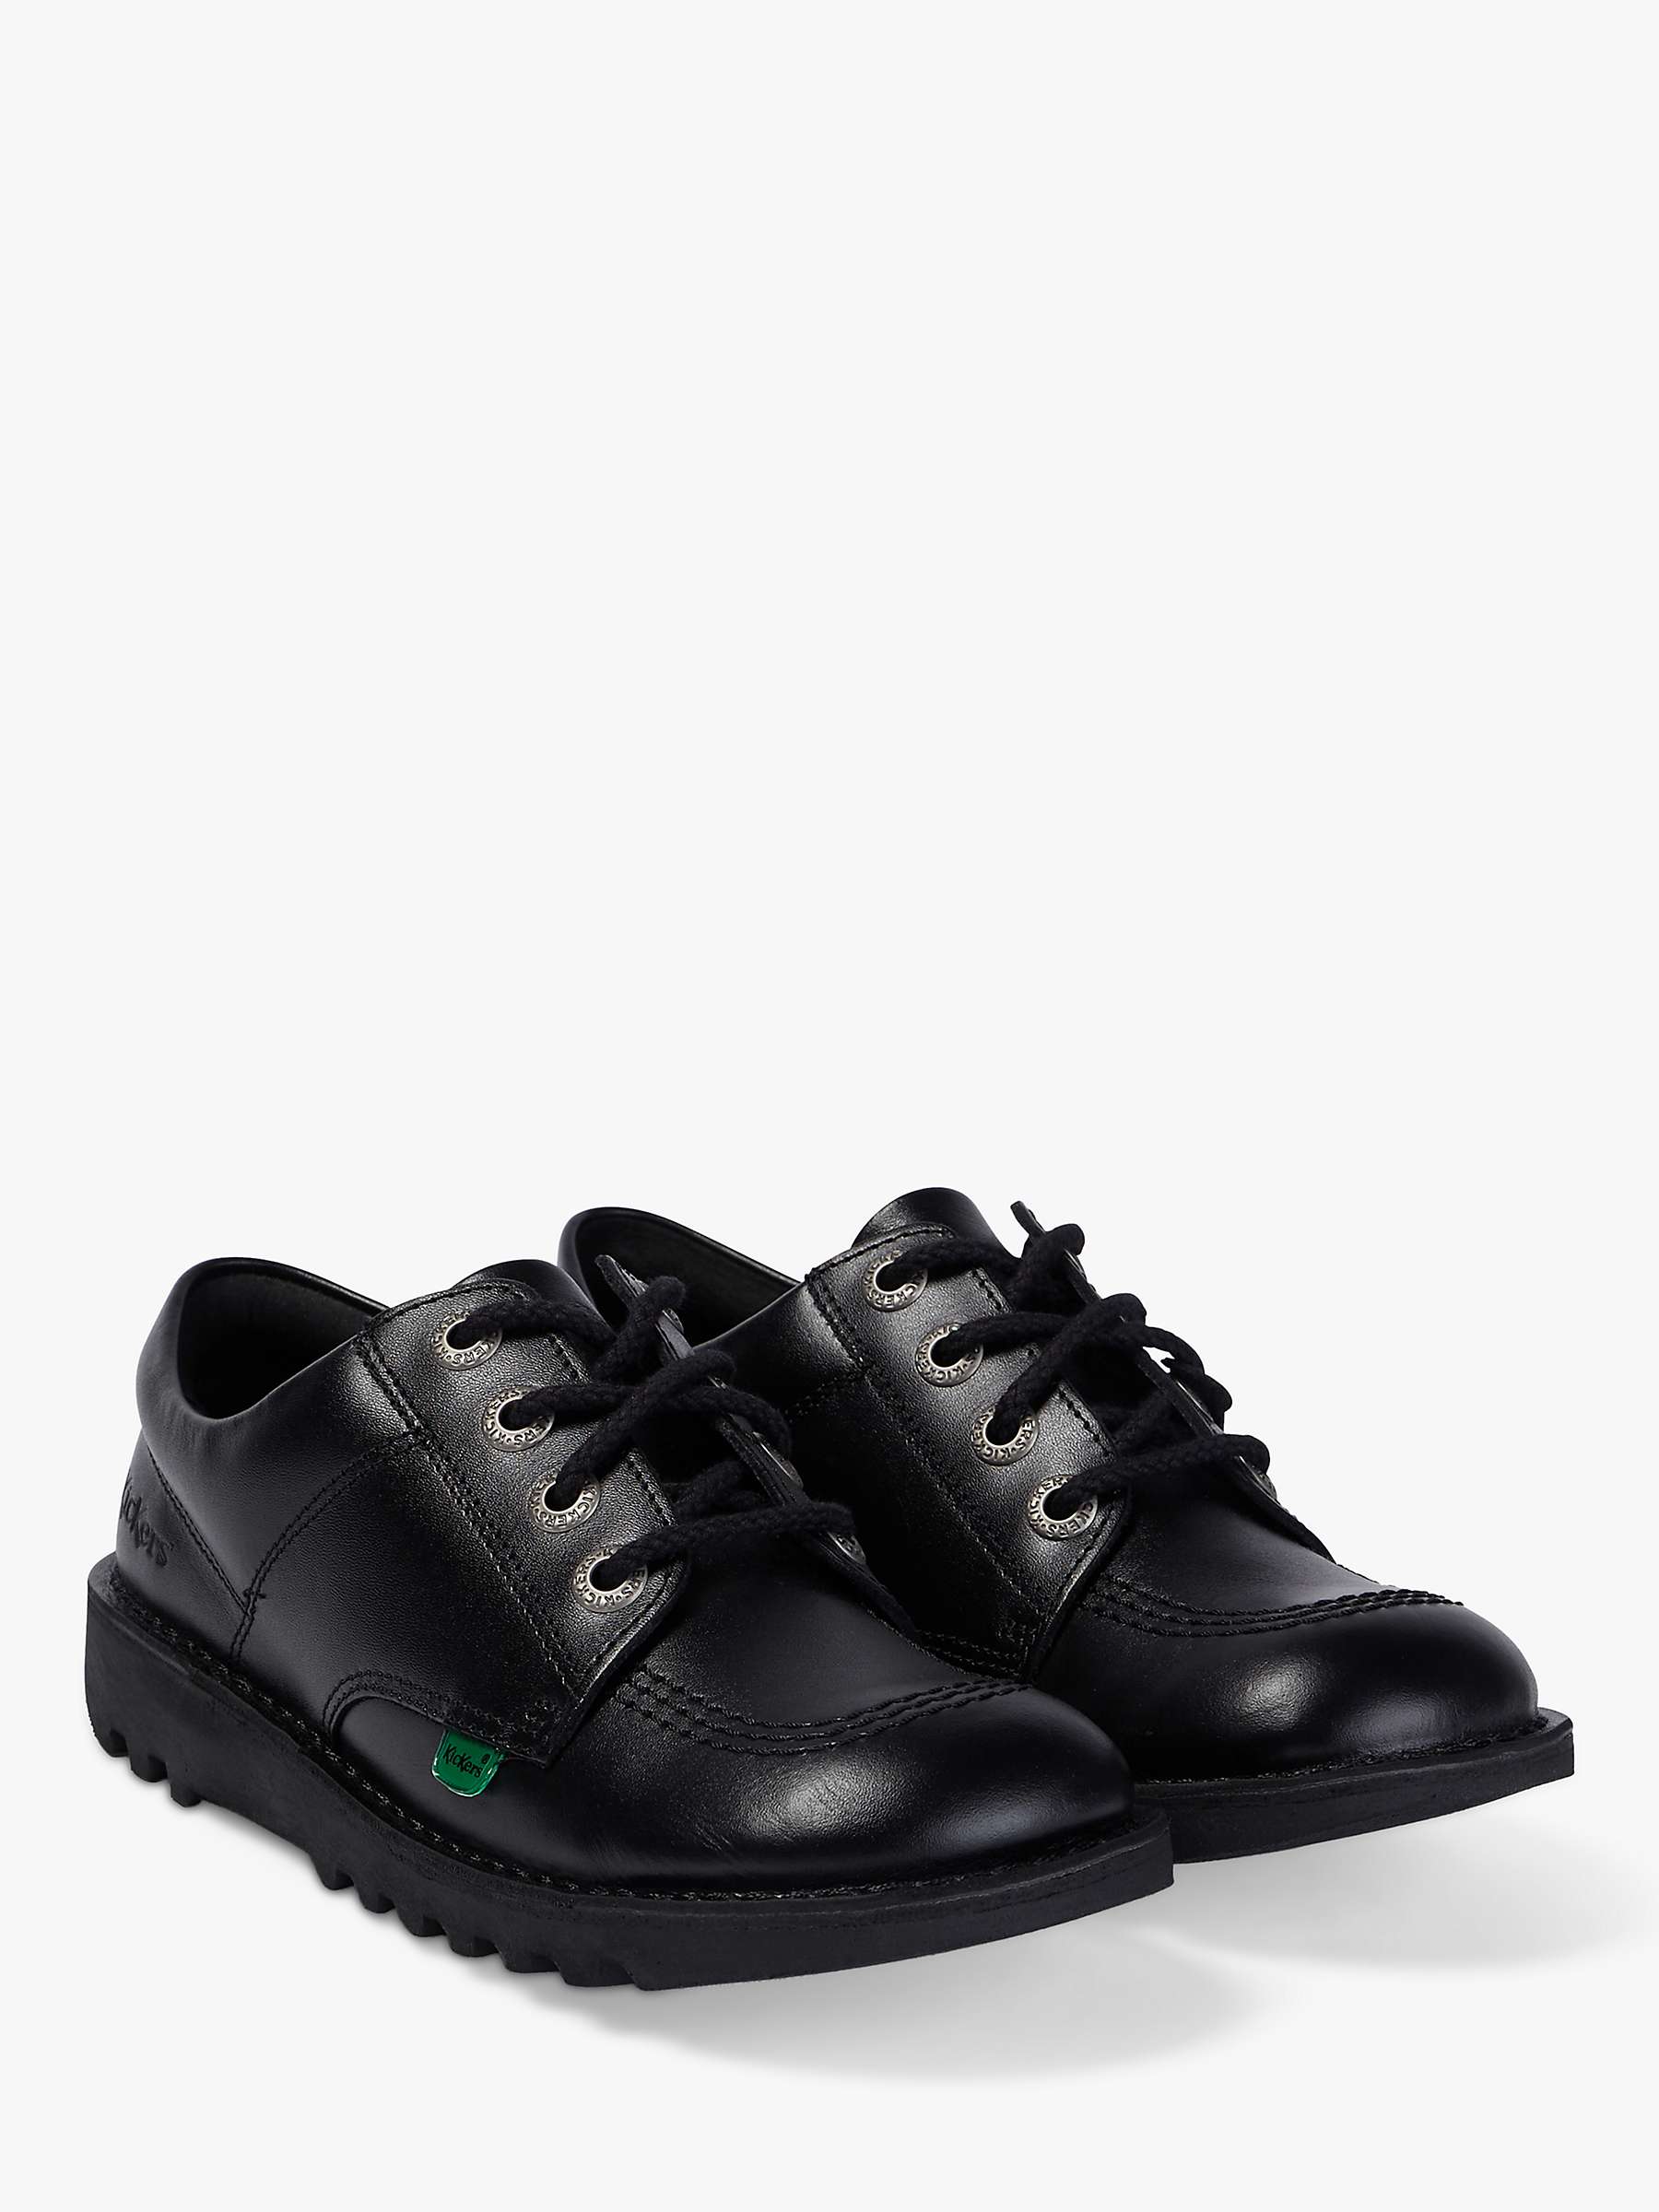 Buy Kickers Kids' Kick Lo Core Lace Up Shoes, Black Leather Online at johnlewis.com